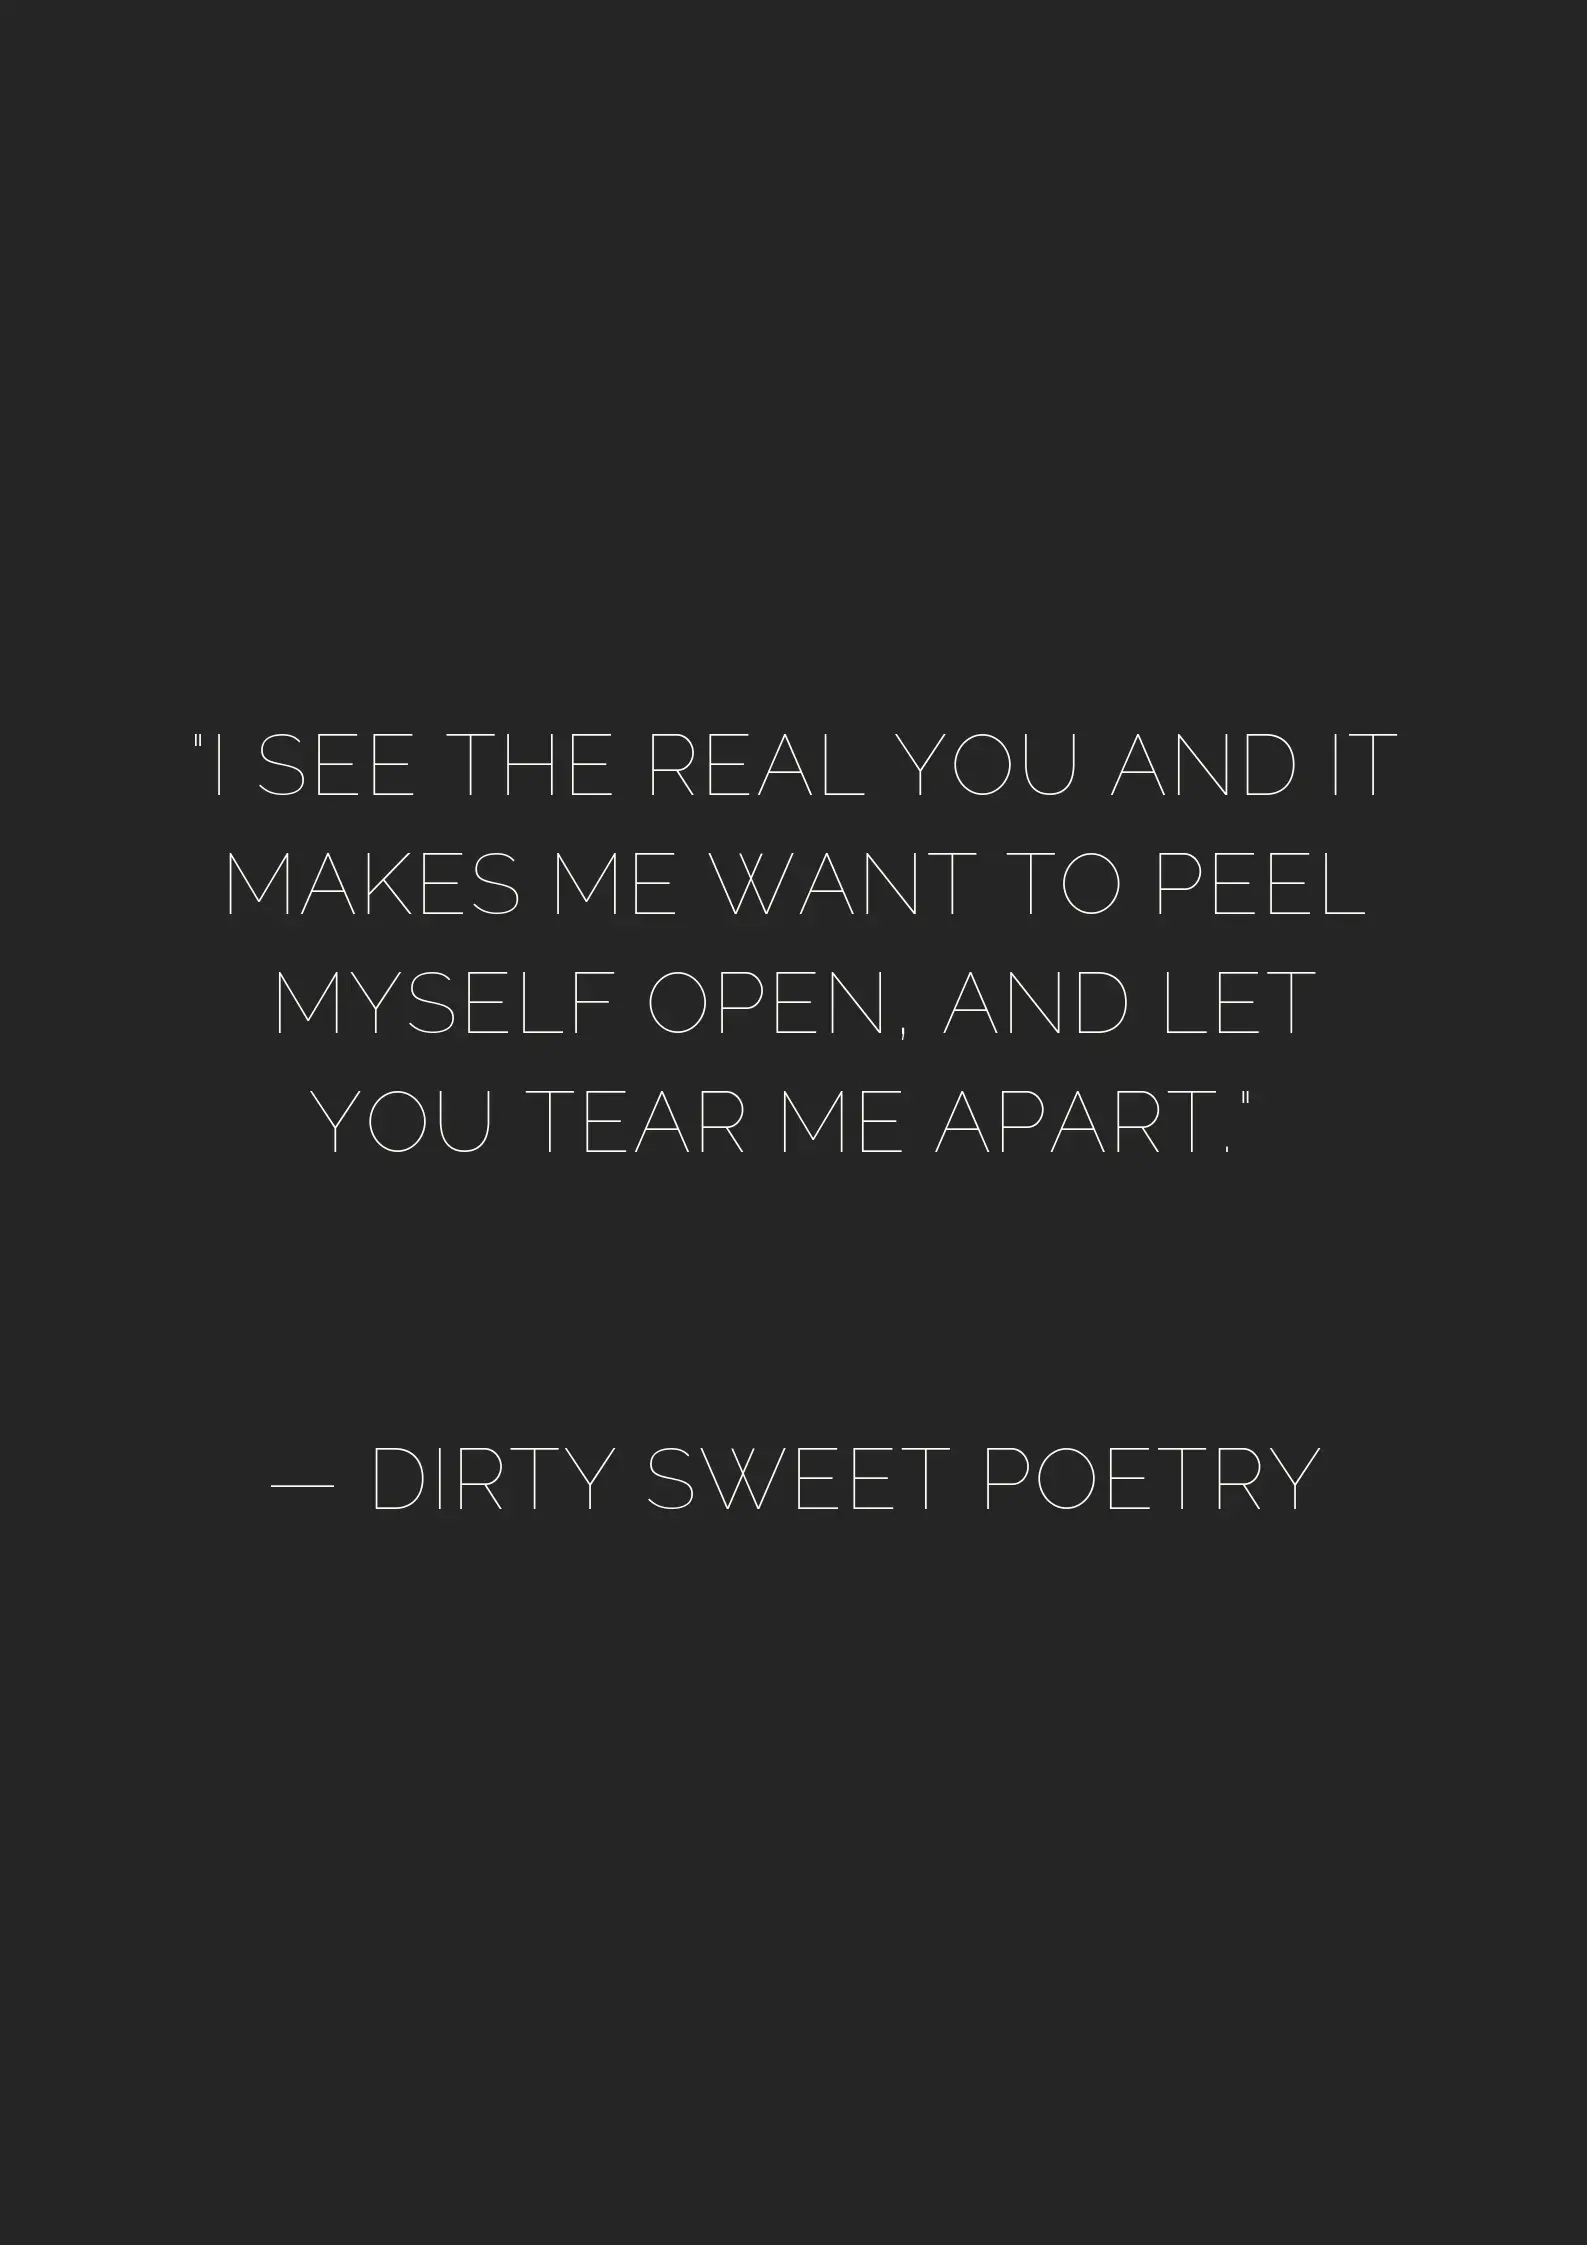 Dirty love quotes for her